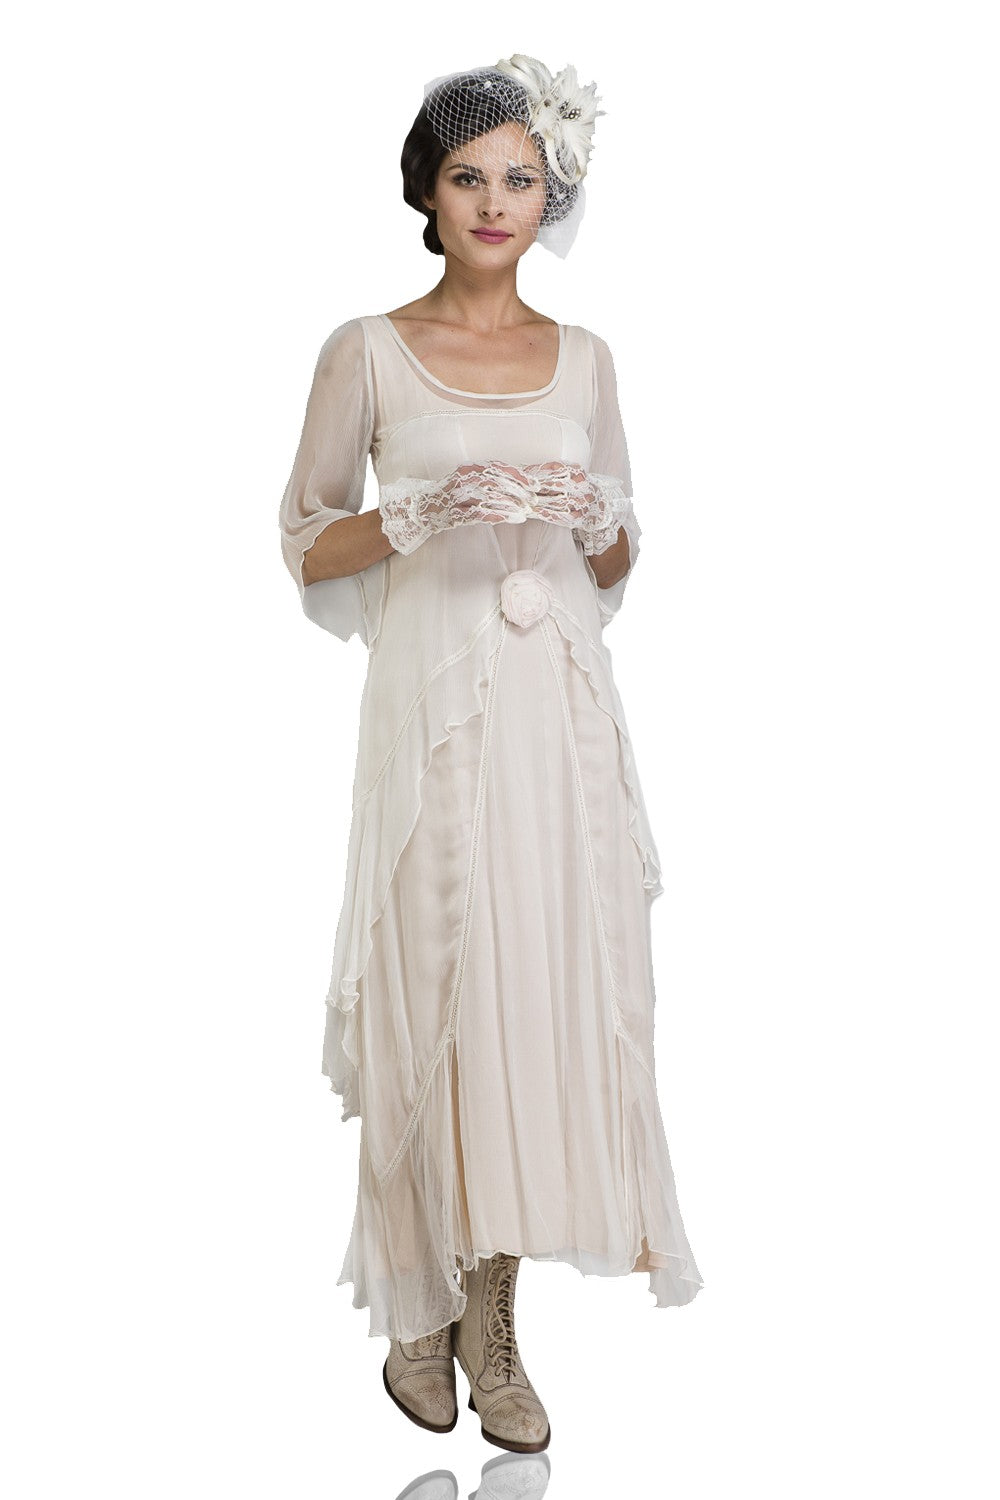 1920s Dress with Sleeves – Modest, Mature, Authentically Inspired 1920s Dresses Great Gatsby Party Dress in Ivory by Nataya $249.00 AT vintagedancer.com